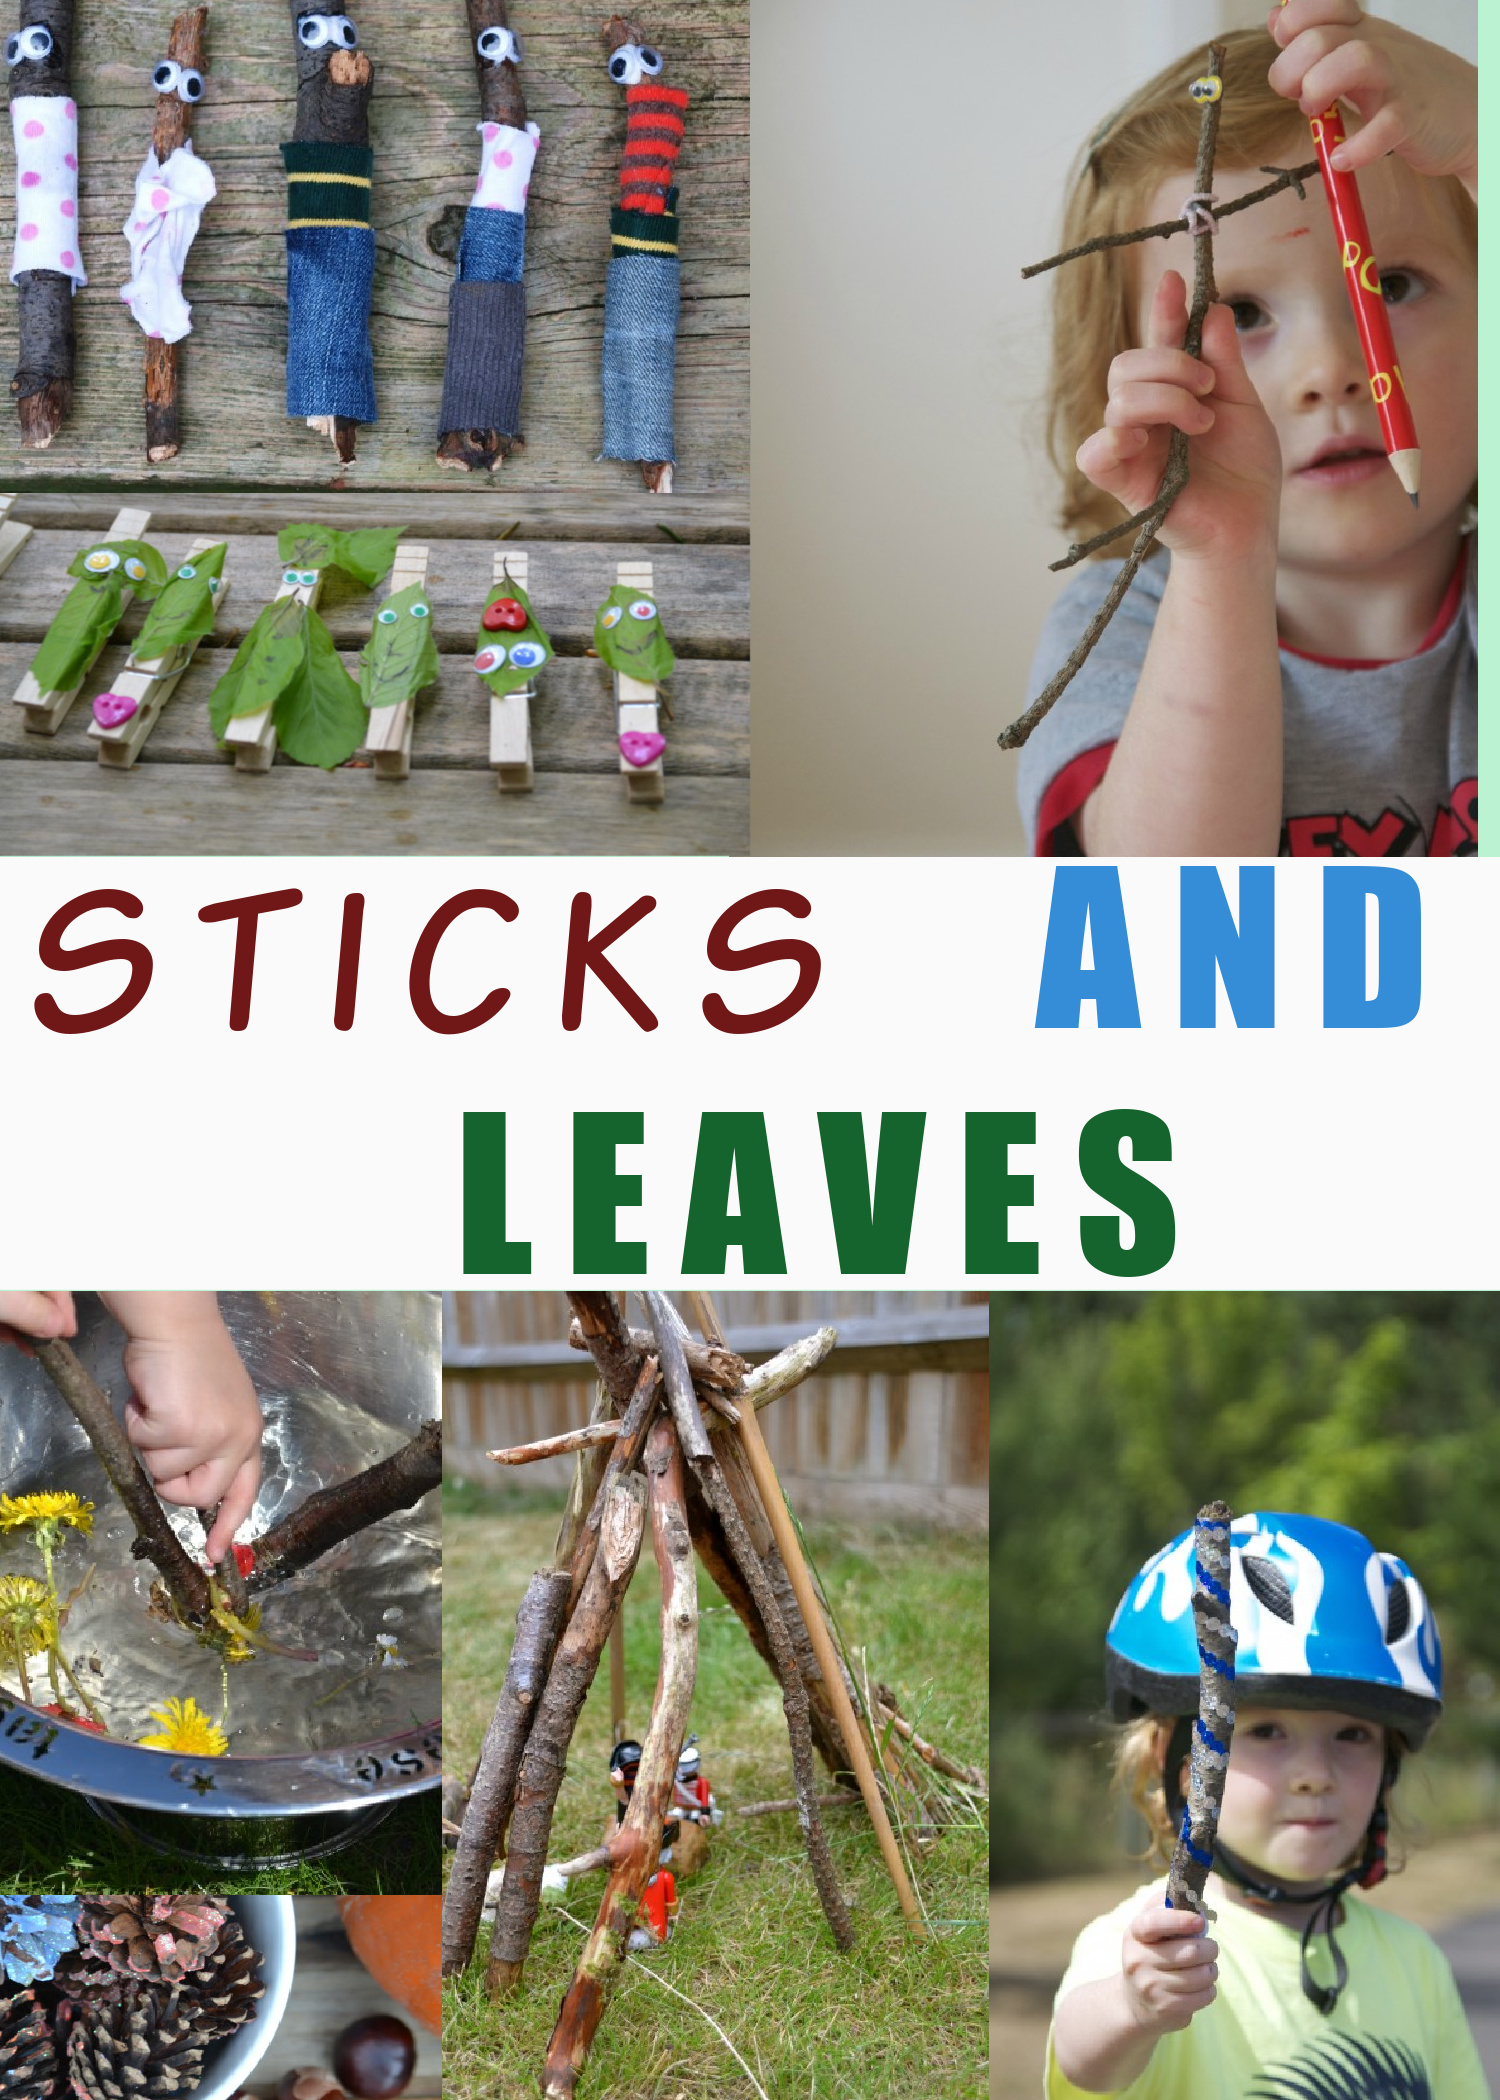 30 Popsicle Stick Crafts for Kids To Make Fun Things